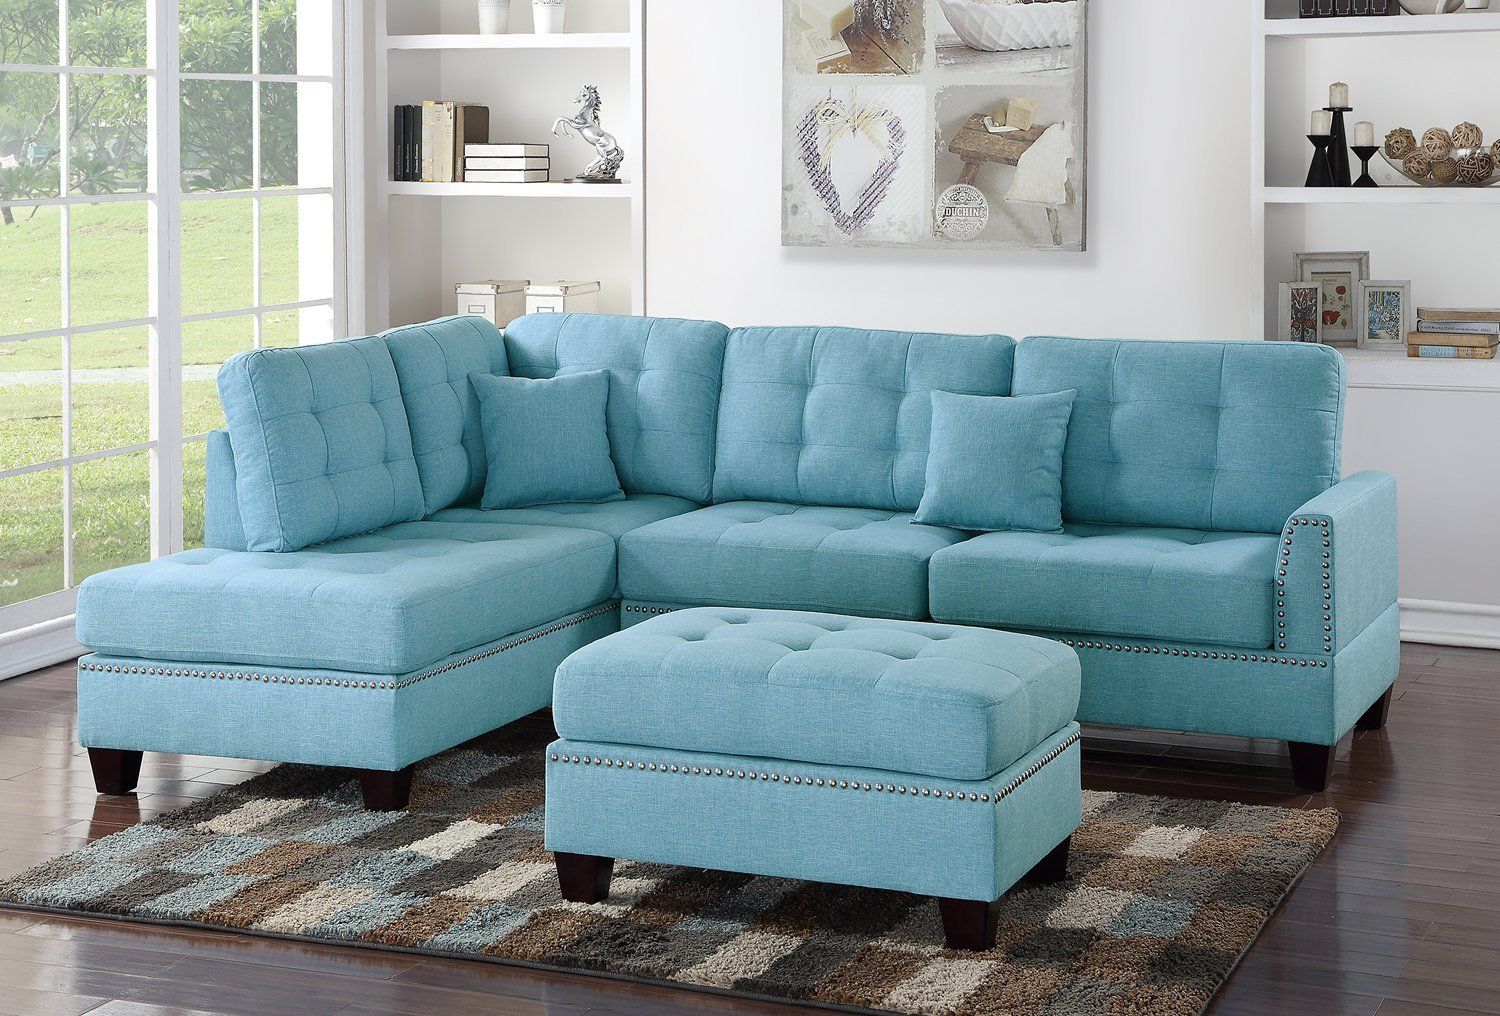 Modern Contemporary Blue Linen Like Fabric Reversible Sectional Sofa Inside White Fabric Outdoor Patio Sets (View 2 of 15)